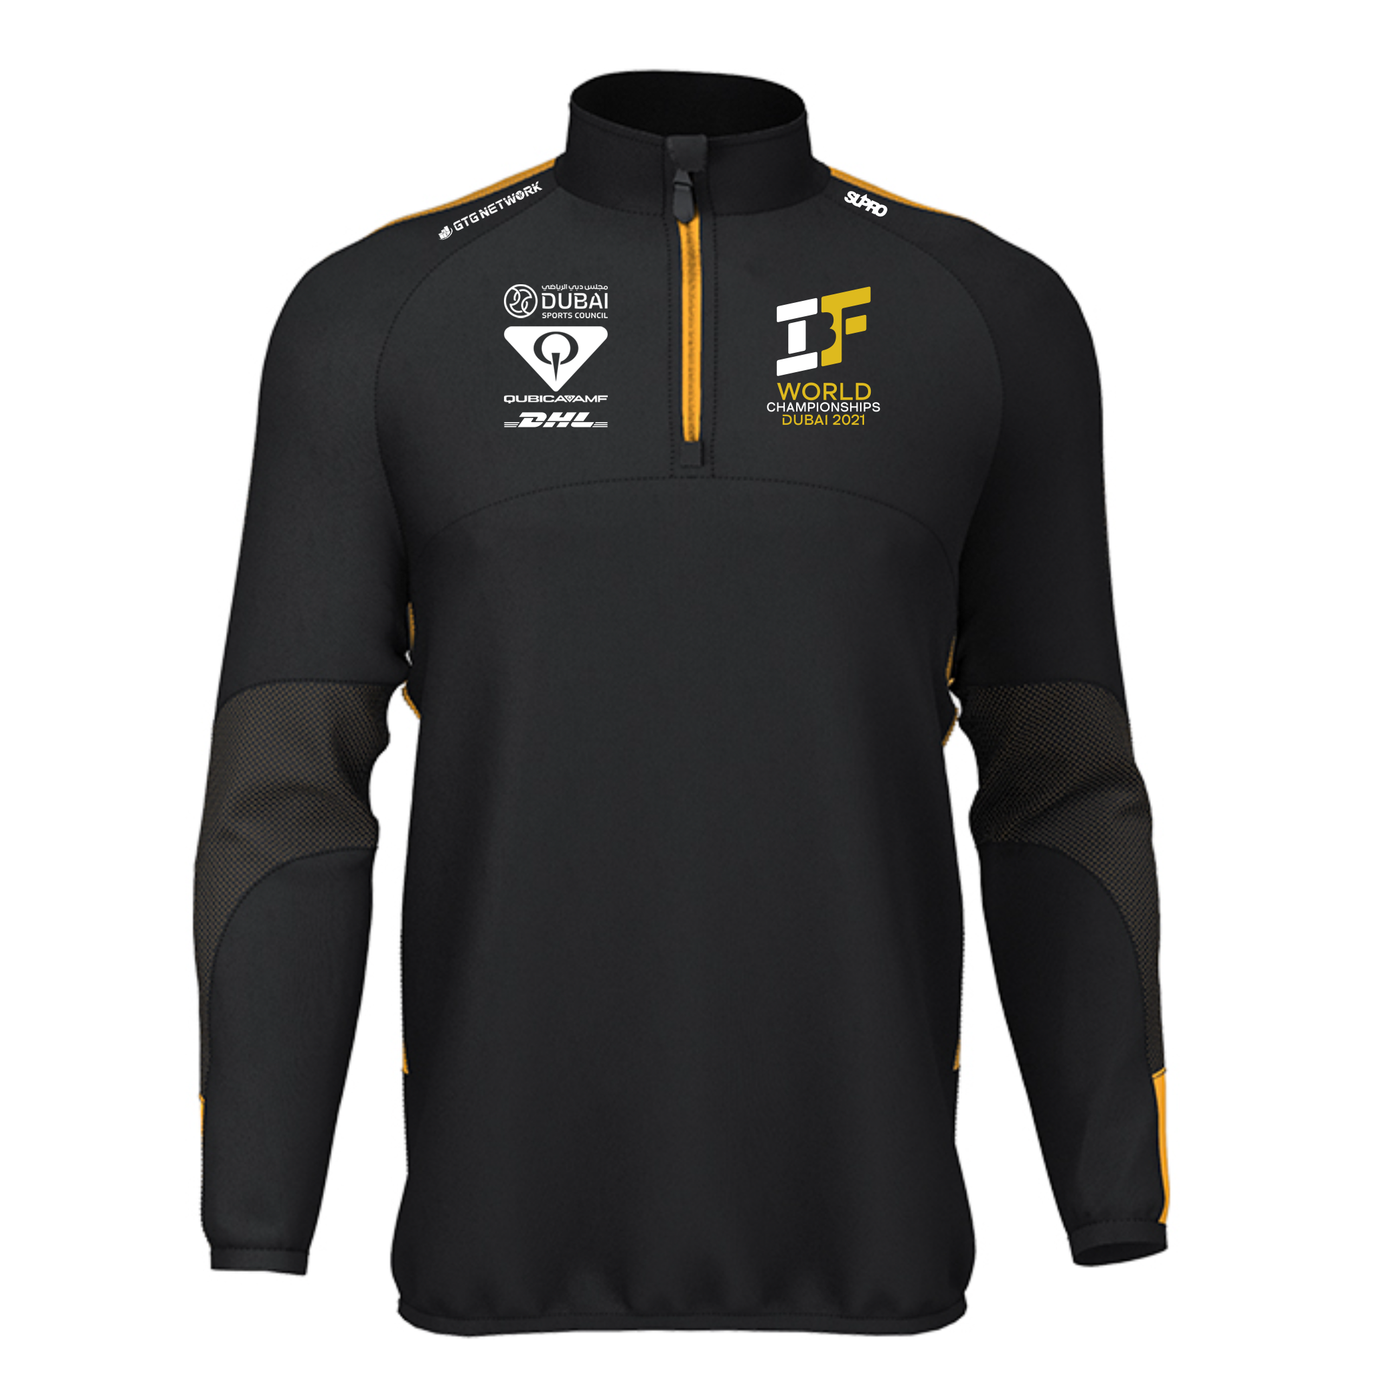 IBF World Championships Official Wear Mid-Layer